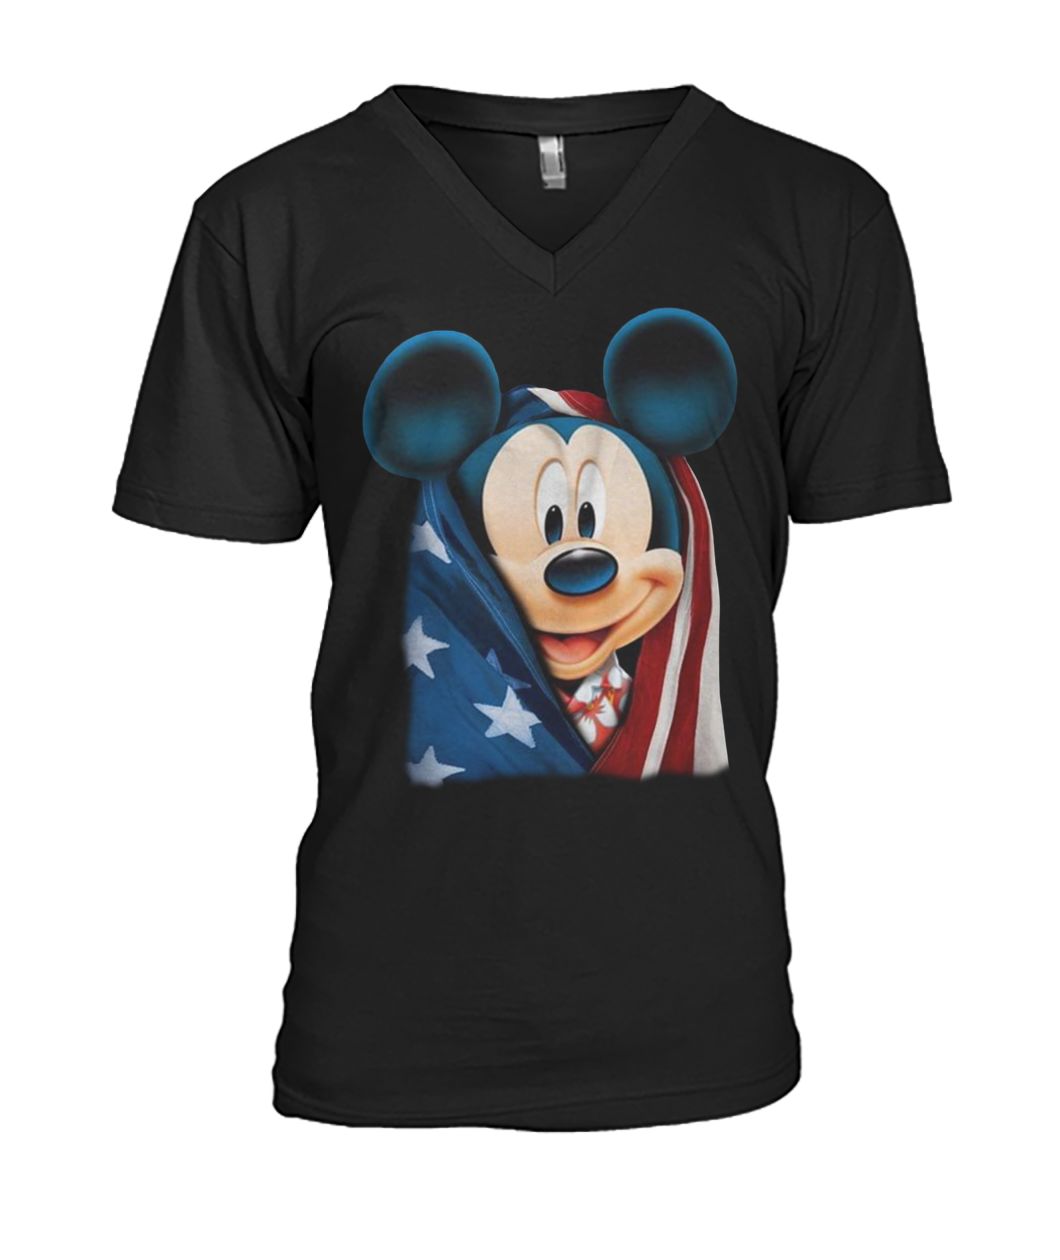 American flag mickey mouse 4th of july mens v-neck